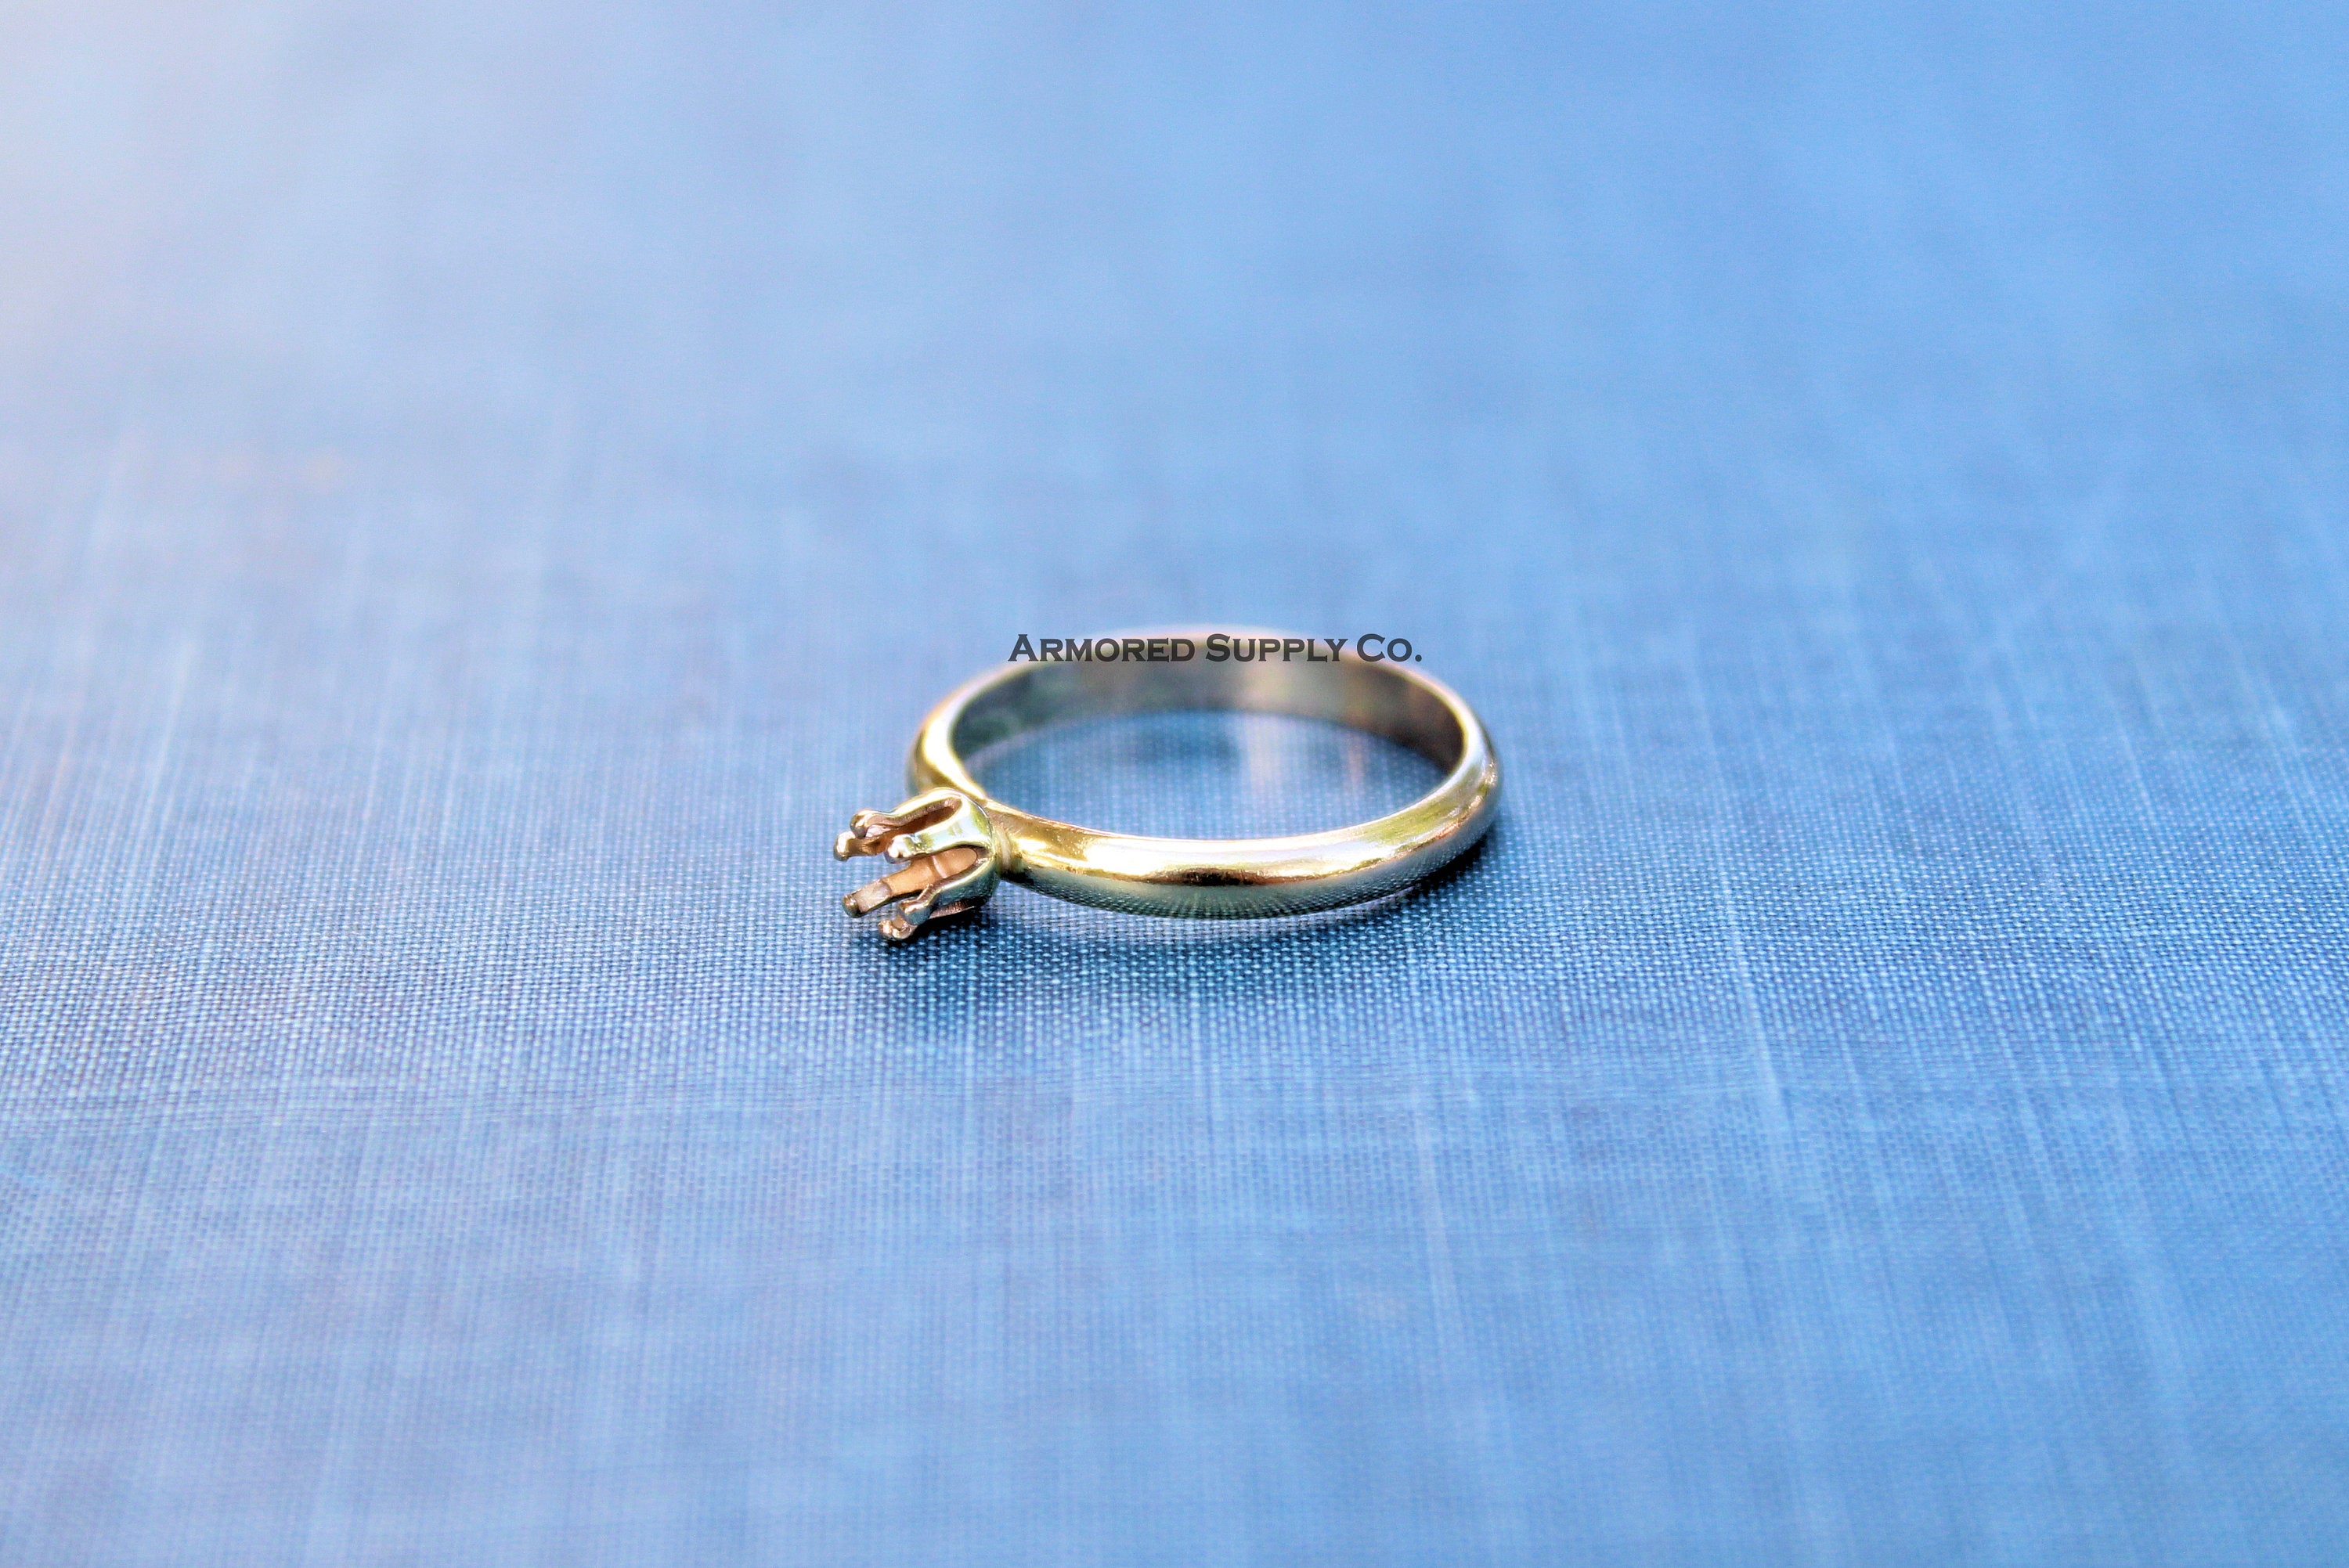 Gold Filled 4mm Snap In Bezel Ring blank,Half Round Ring Band, Breast Milk DIY ring, DIY jewelry supplies, wholesale jewelry, diy ring blank